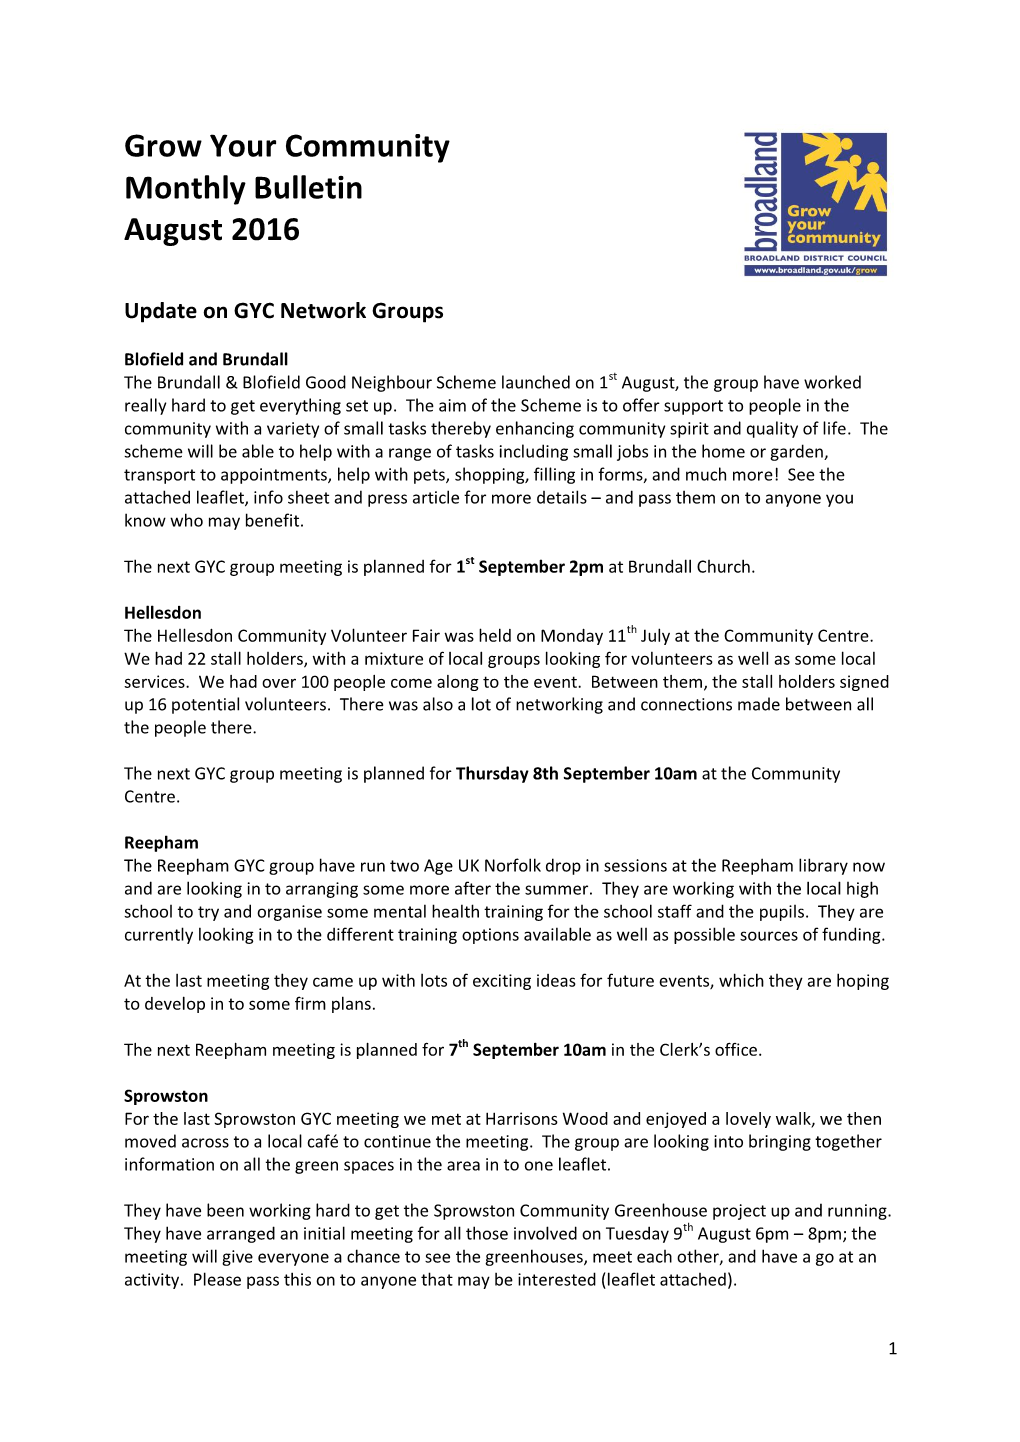 Grow Your Community Monthly Bulletin August 2016